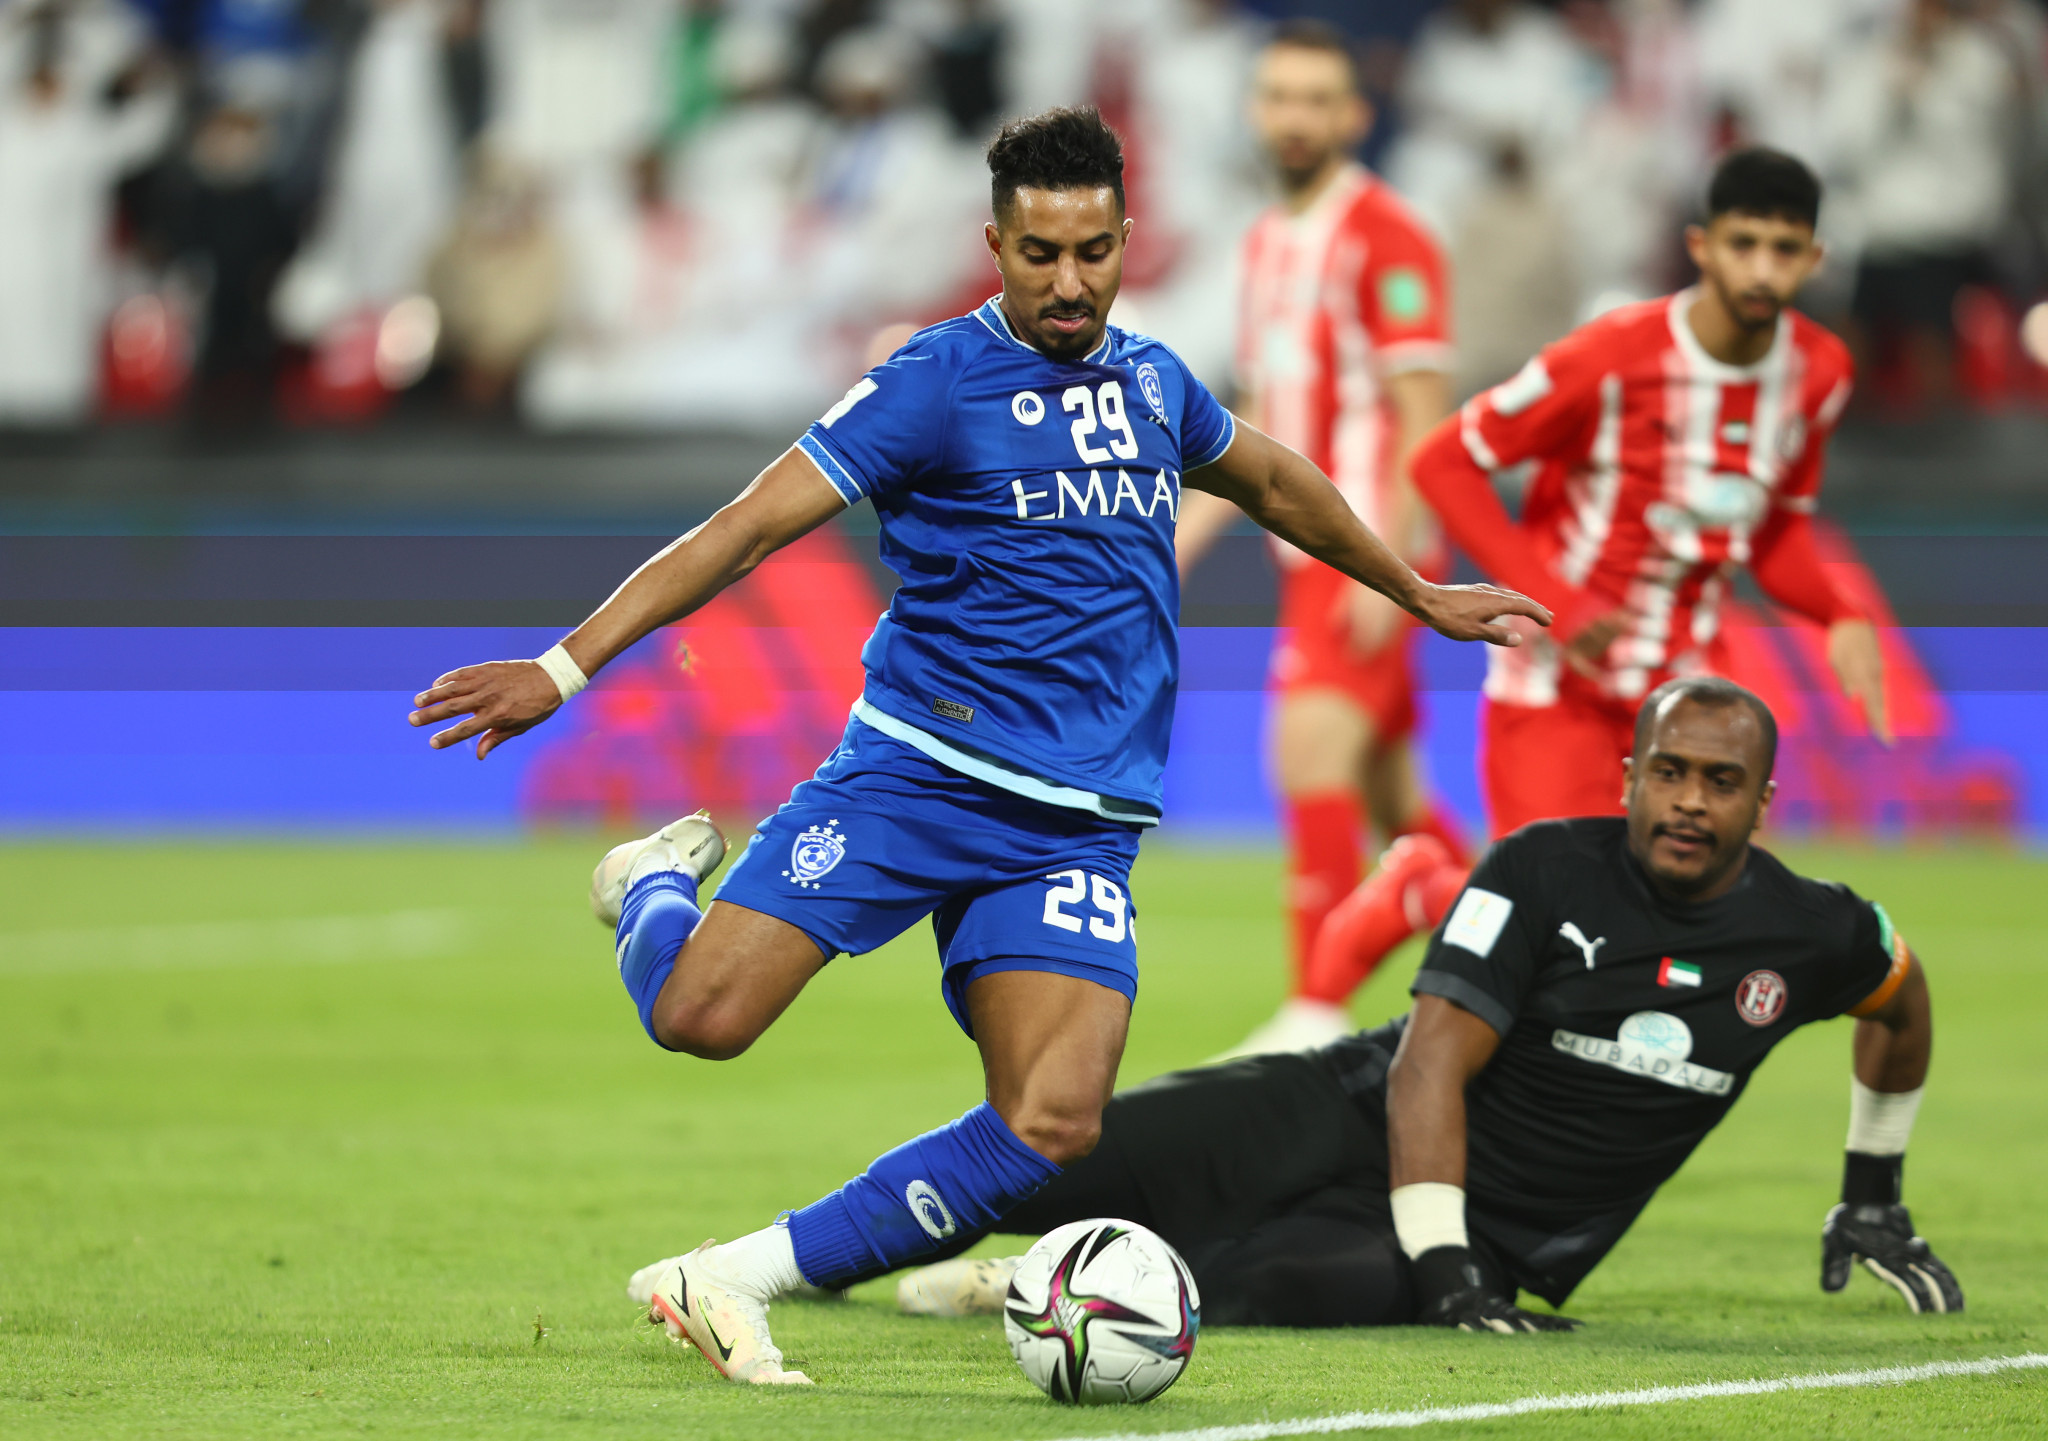 Al Hilal smashes six past Al Jazira in FIFA Club World Cup second round